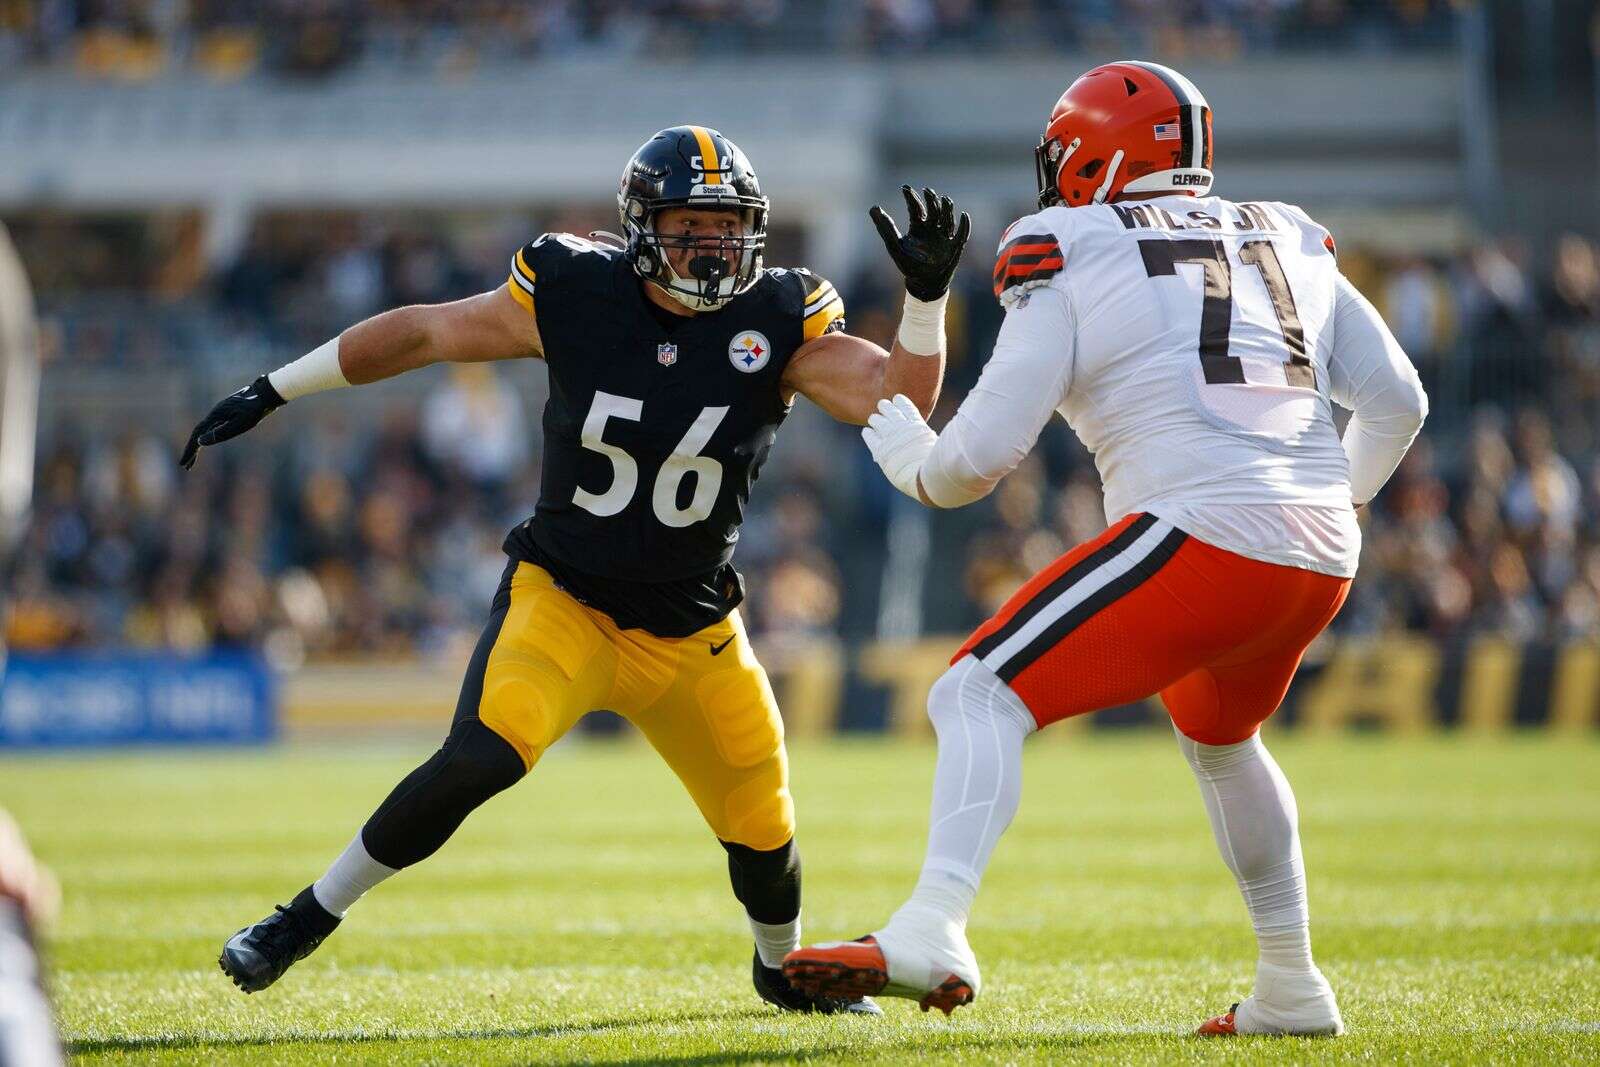 Linebacker Alex Highsmith signs contract to stay with the Steelers through  2027 – Butler Eagle